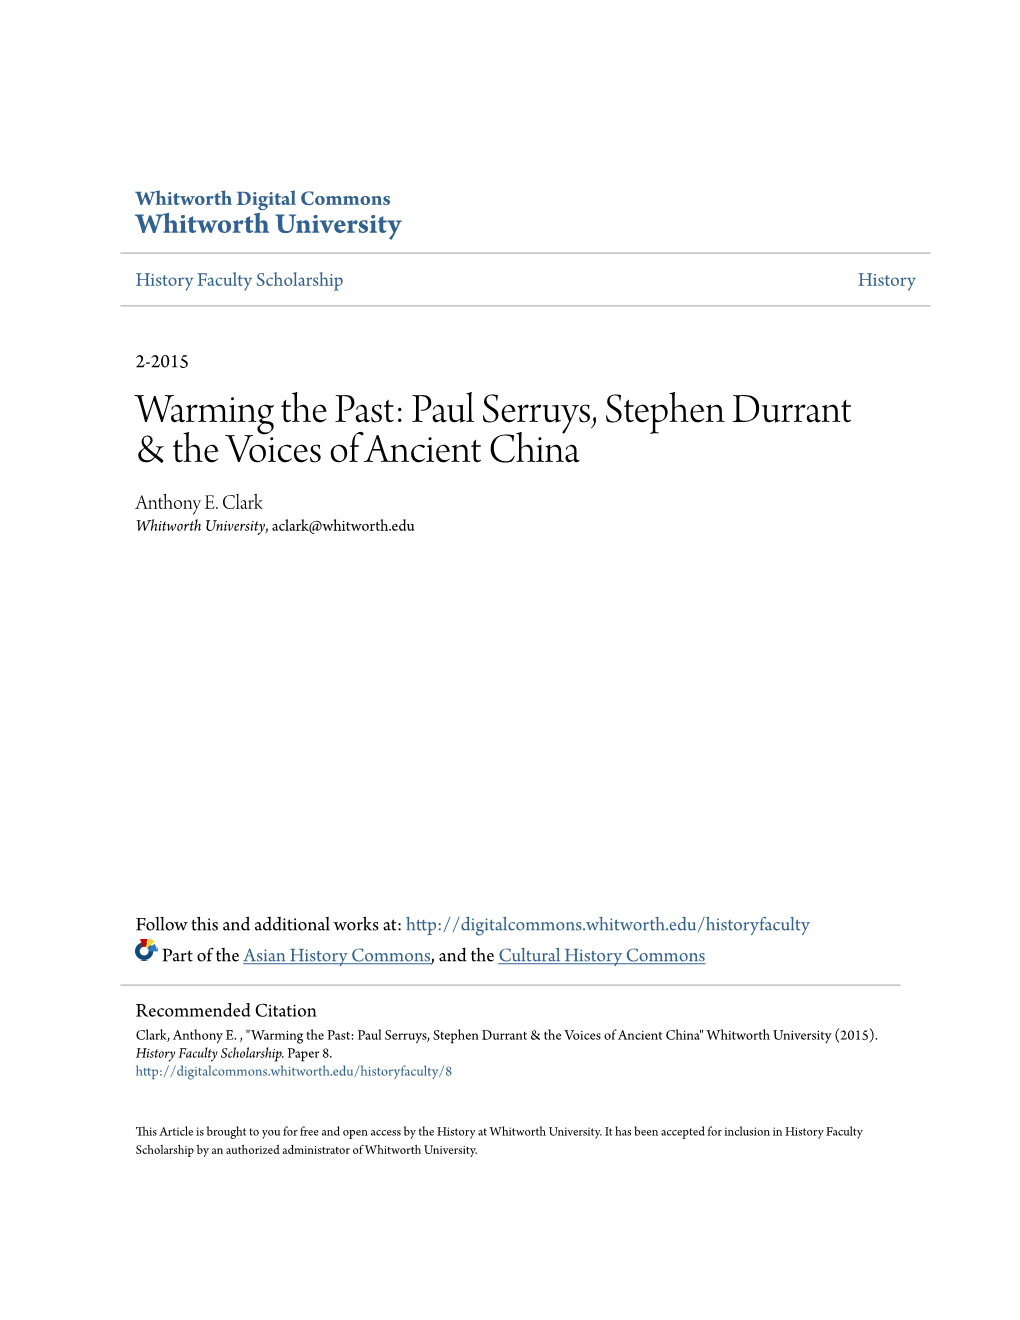 Paul Serruys, Stephen Durrant & the Voices of Ancient China